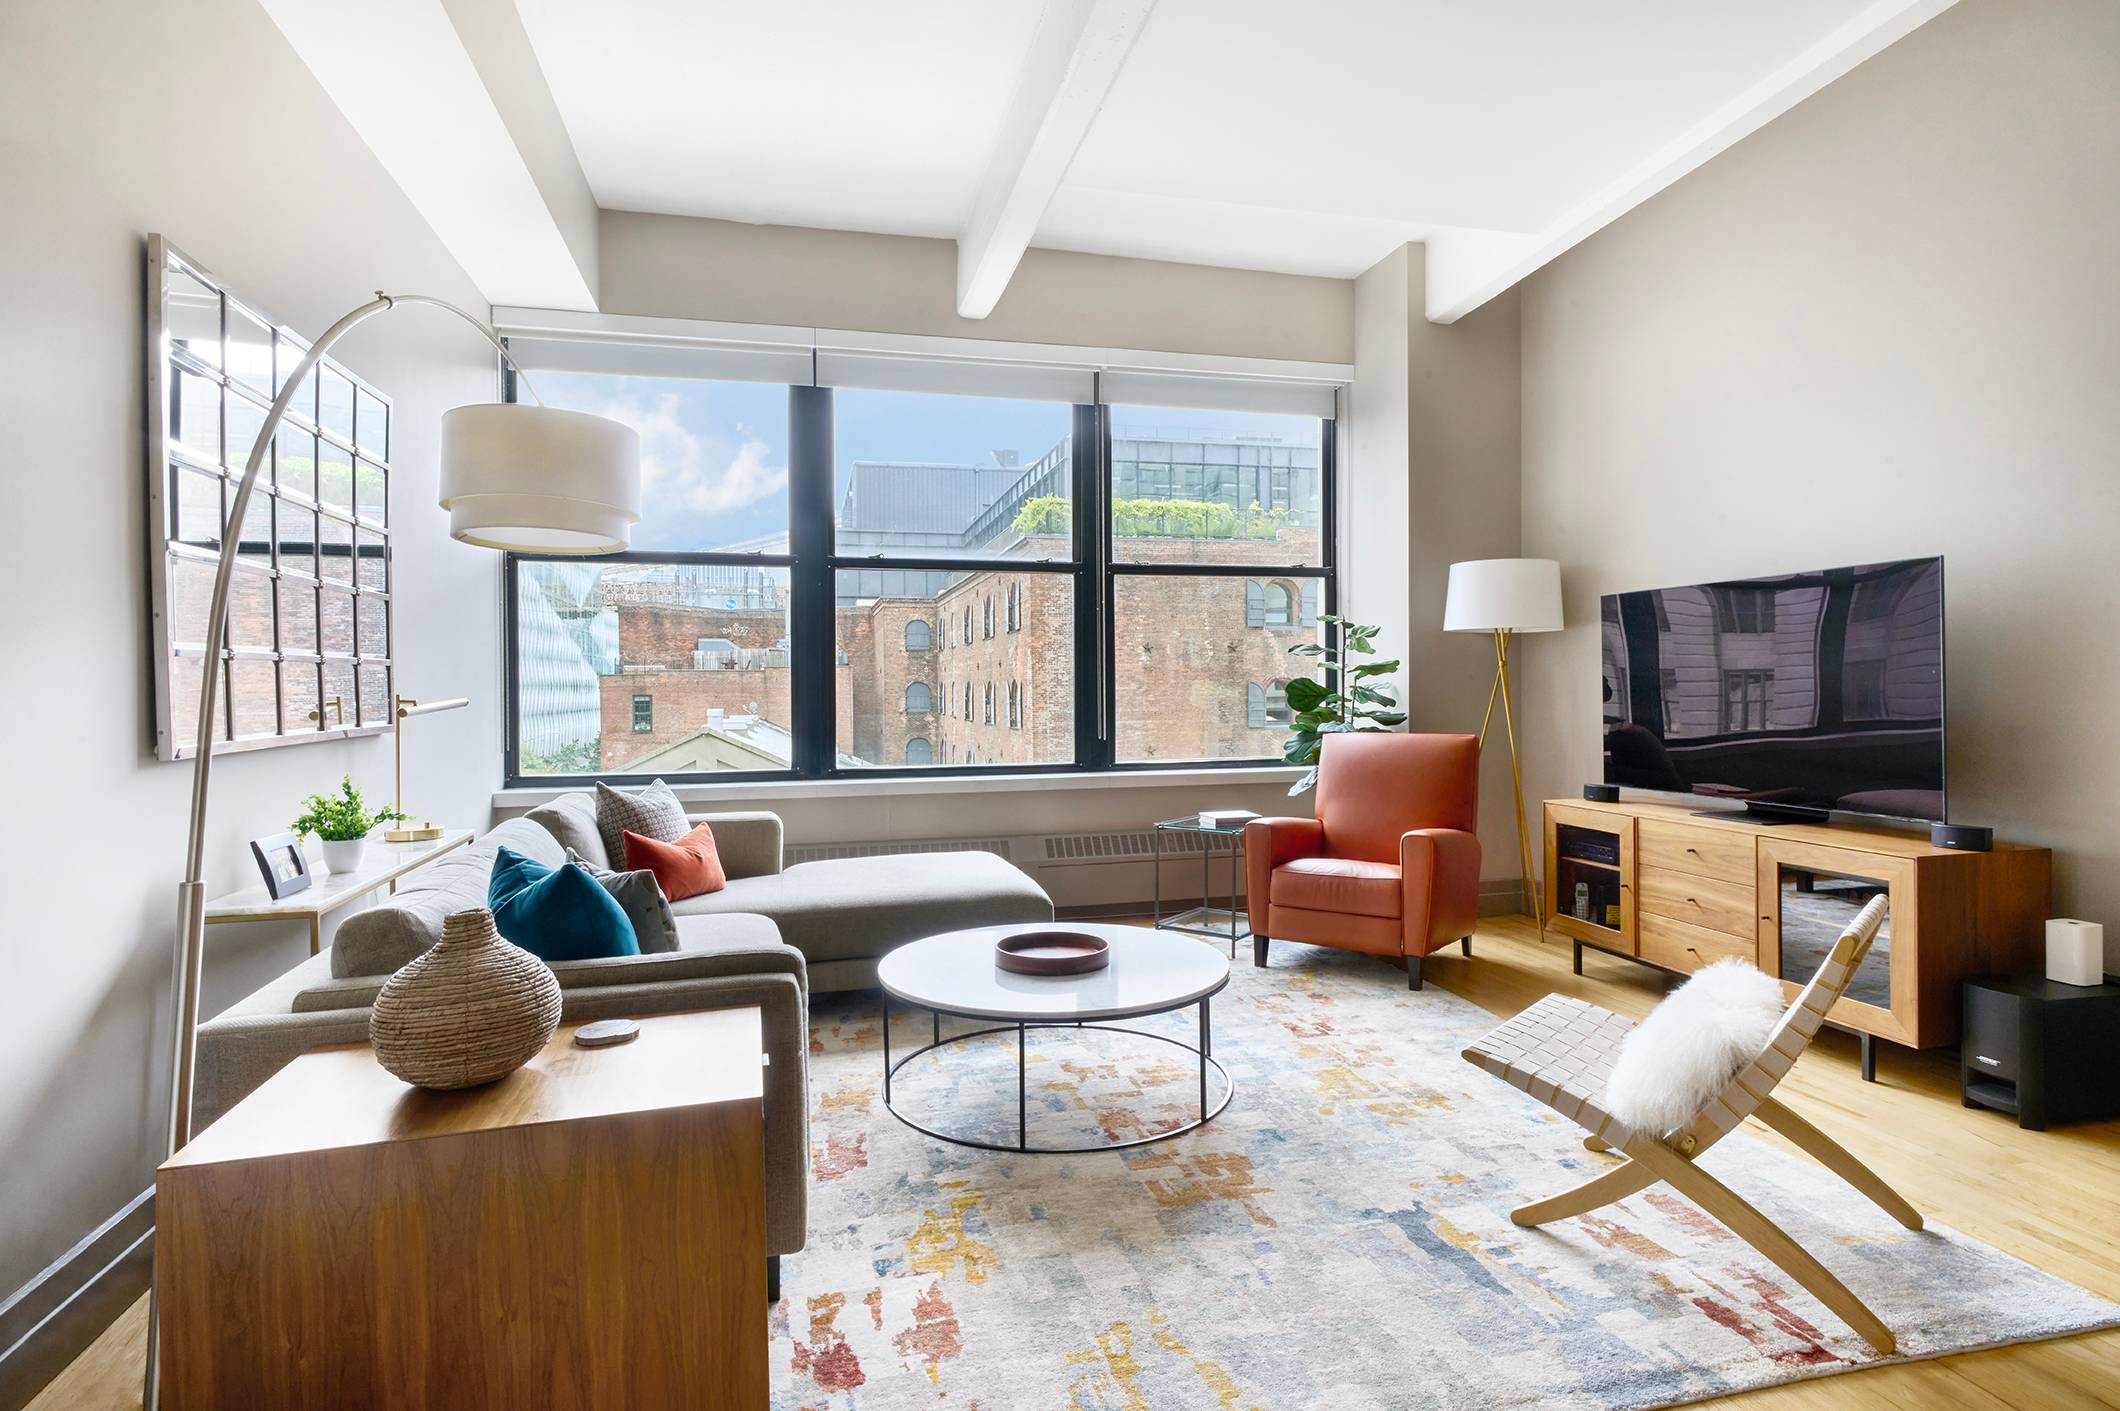 ALL OPEN HOUSES AND SHOWINGS ARE BY APPOINTMENT ONLY Dramatic loft proportions and masterful updates define this stunning one bedroom plus den, two bathroom residence in The Clock Tower, Dumbo's ...